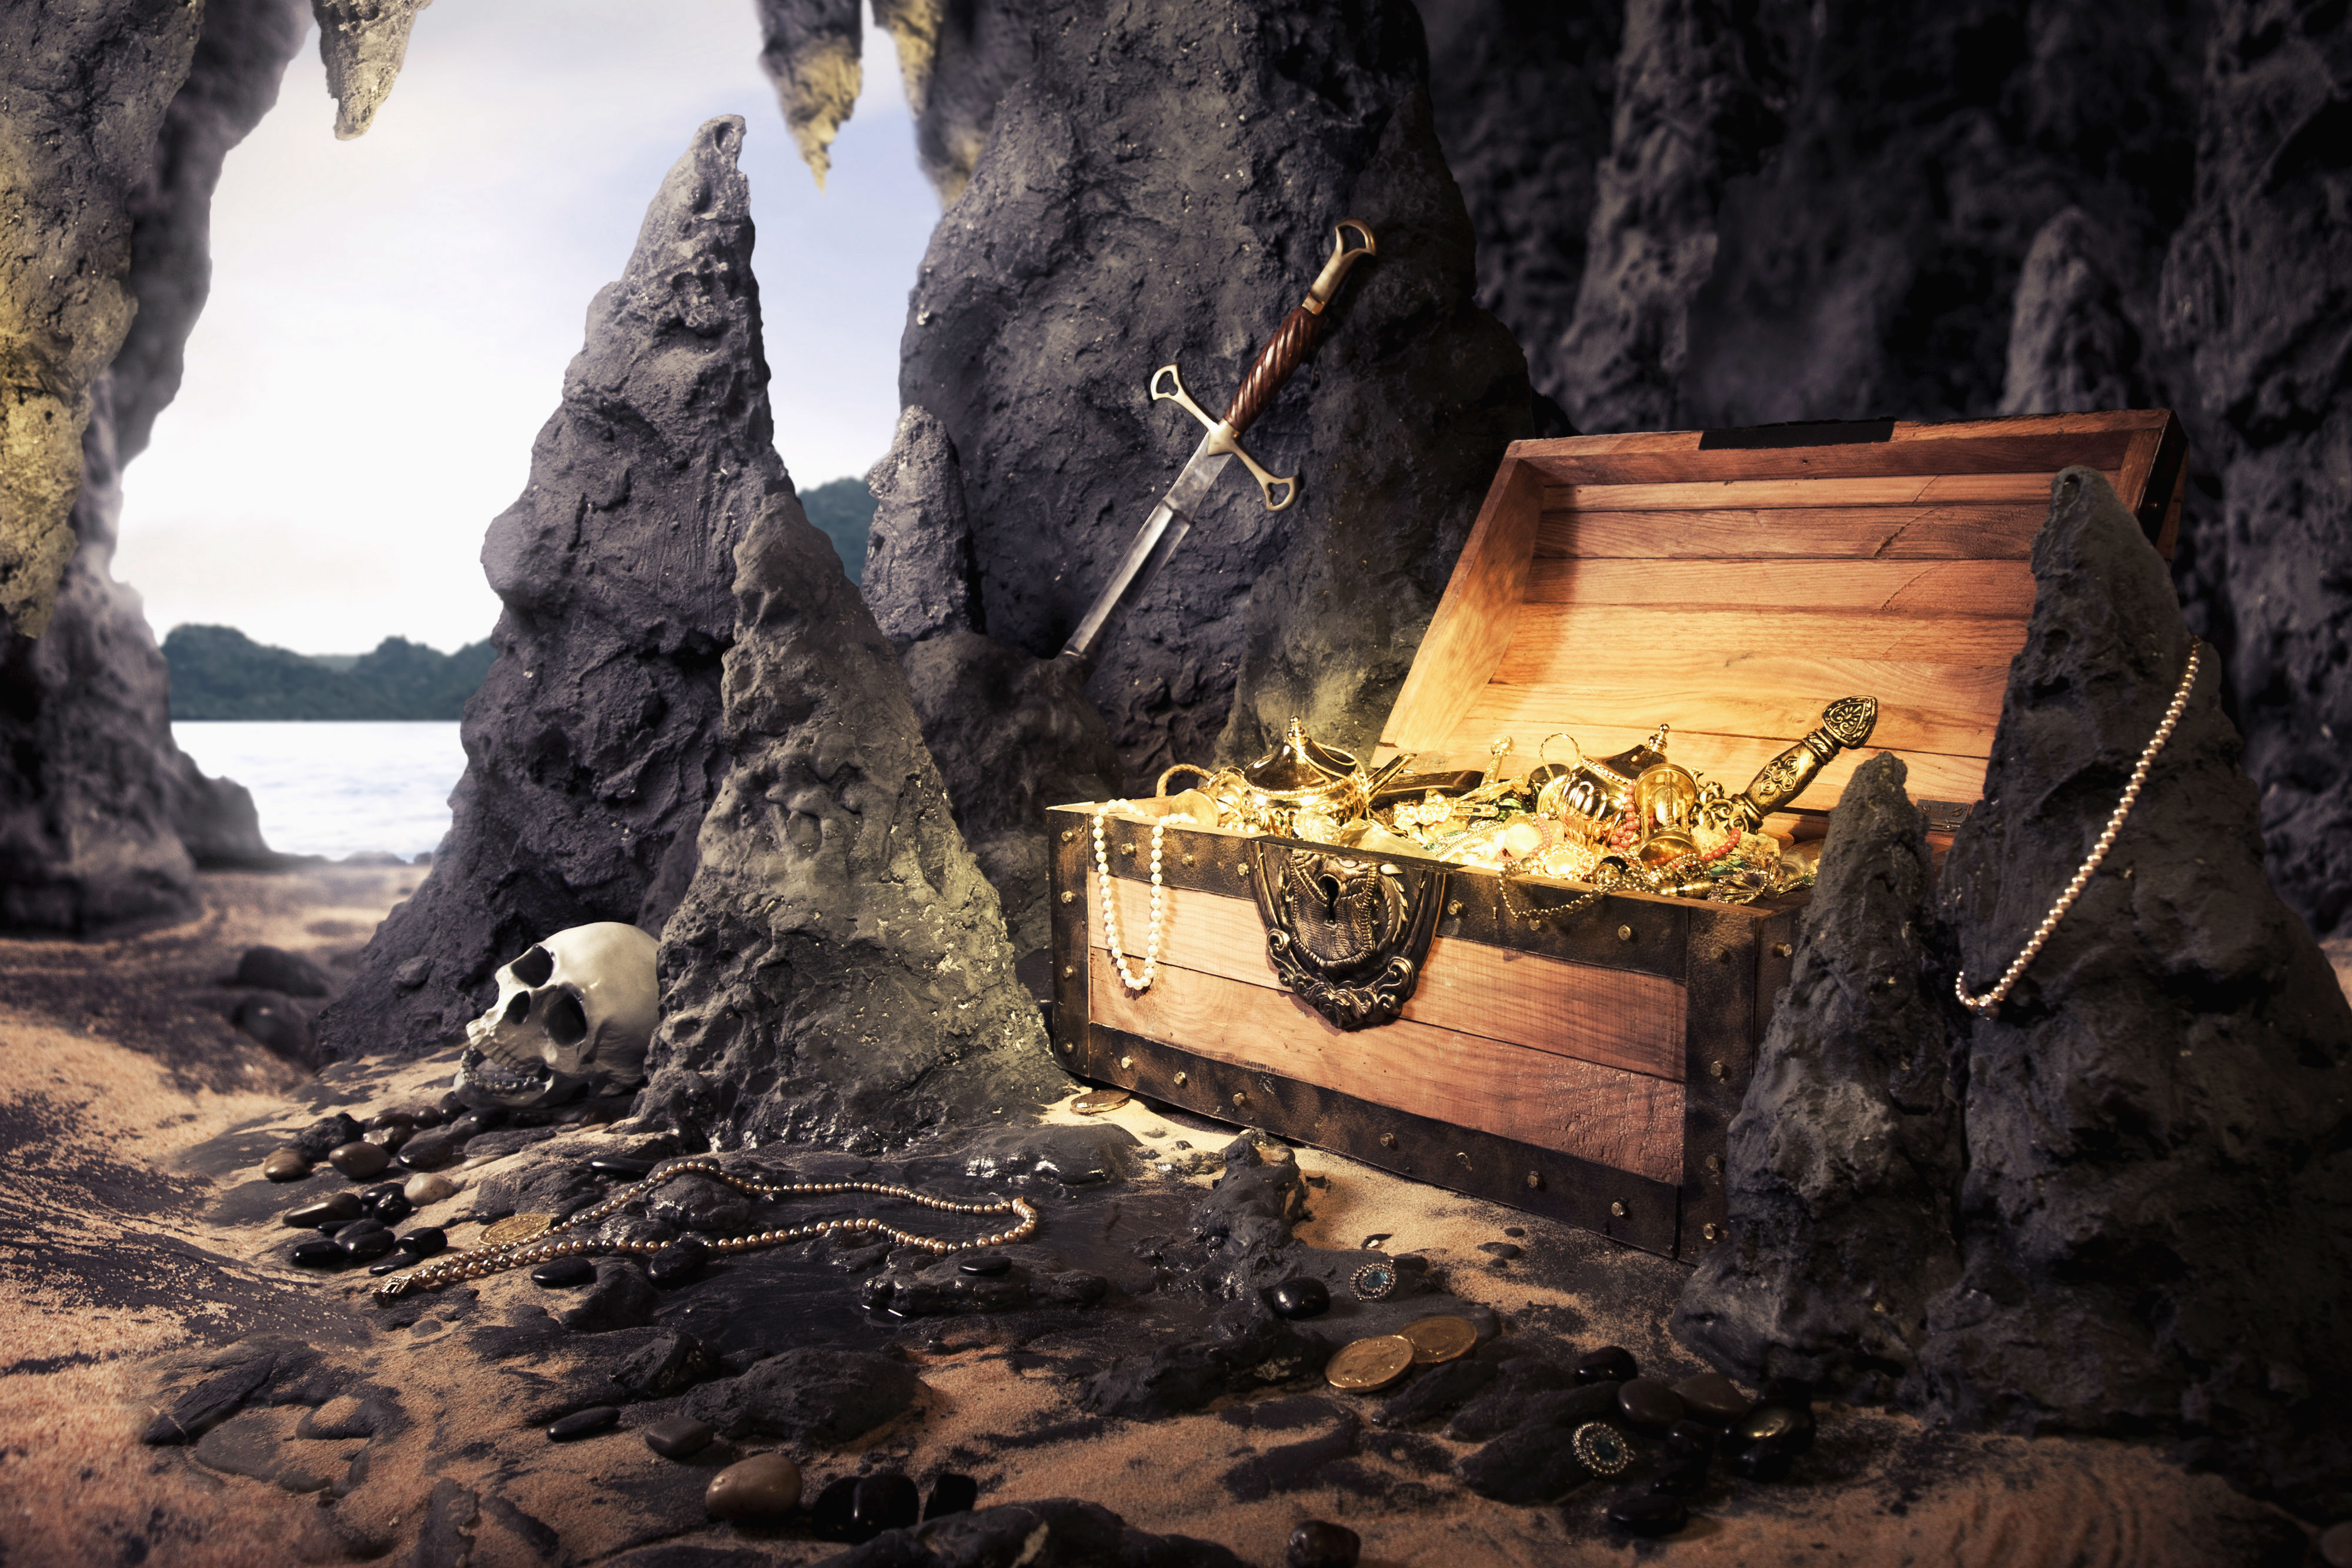 Pirates Wallpaper High Quality For Free Wallpaper - Treasure Chest In A Cave - HD Wallpaper 